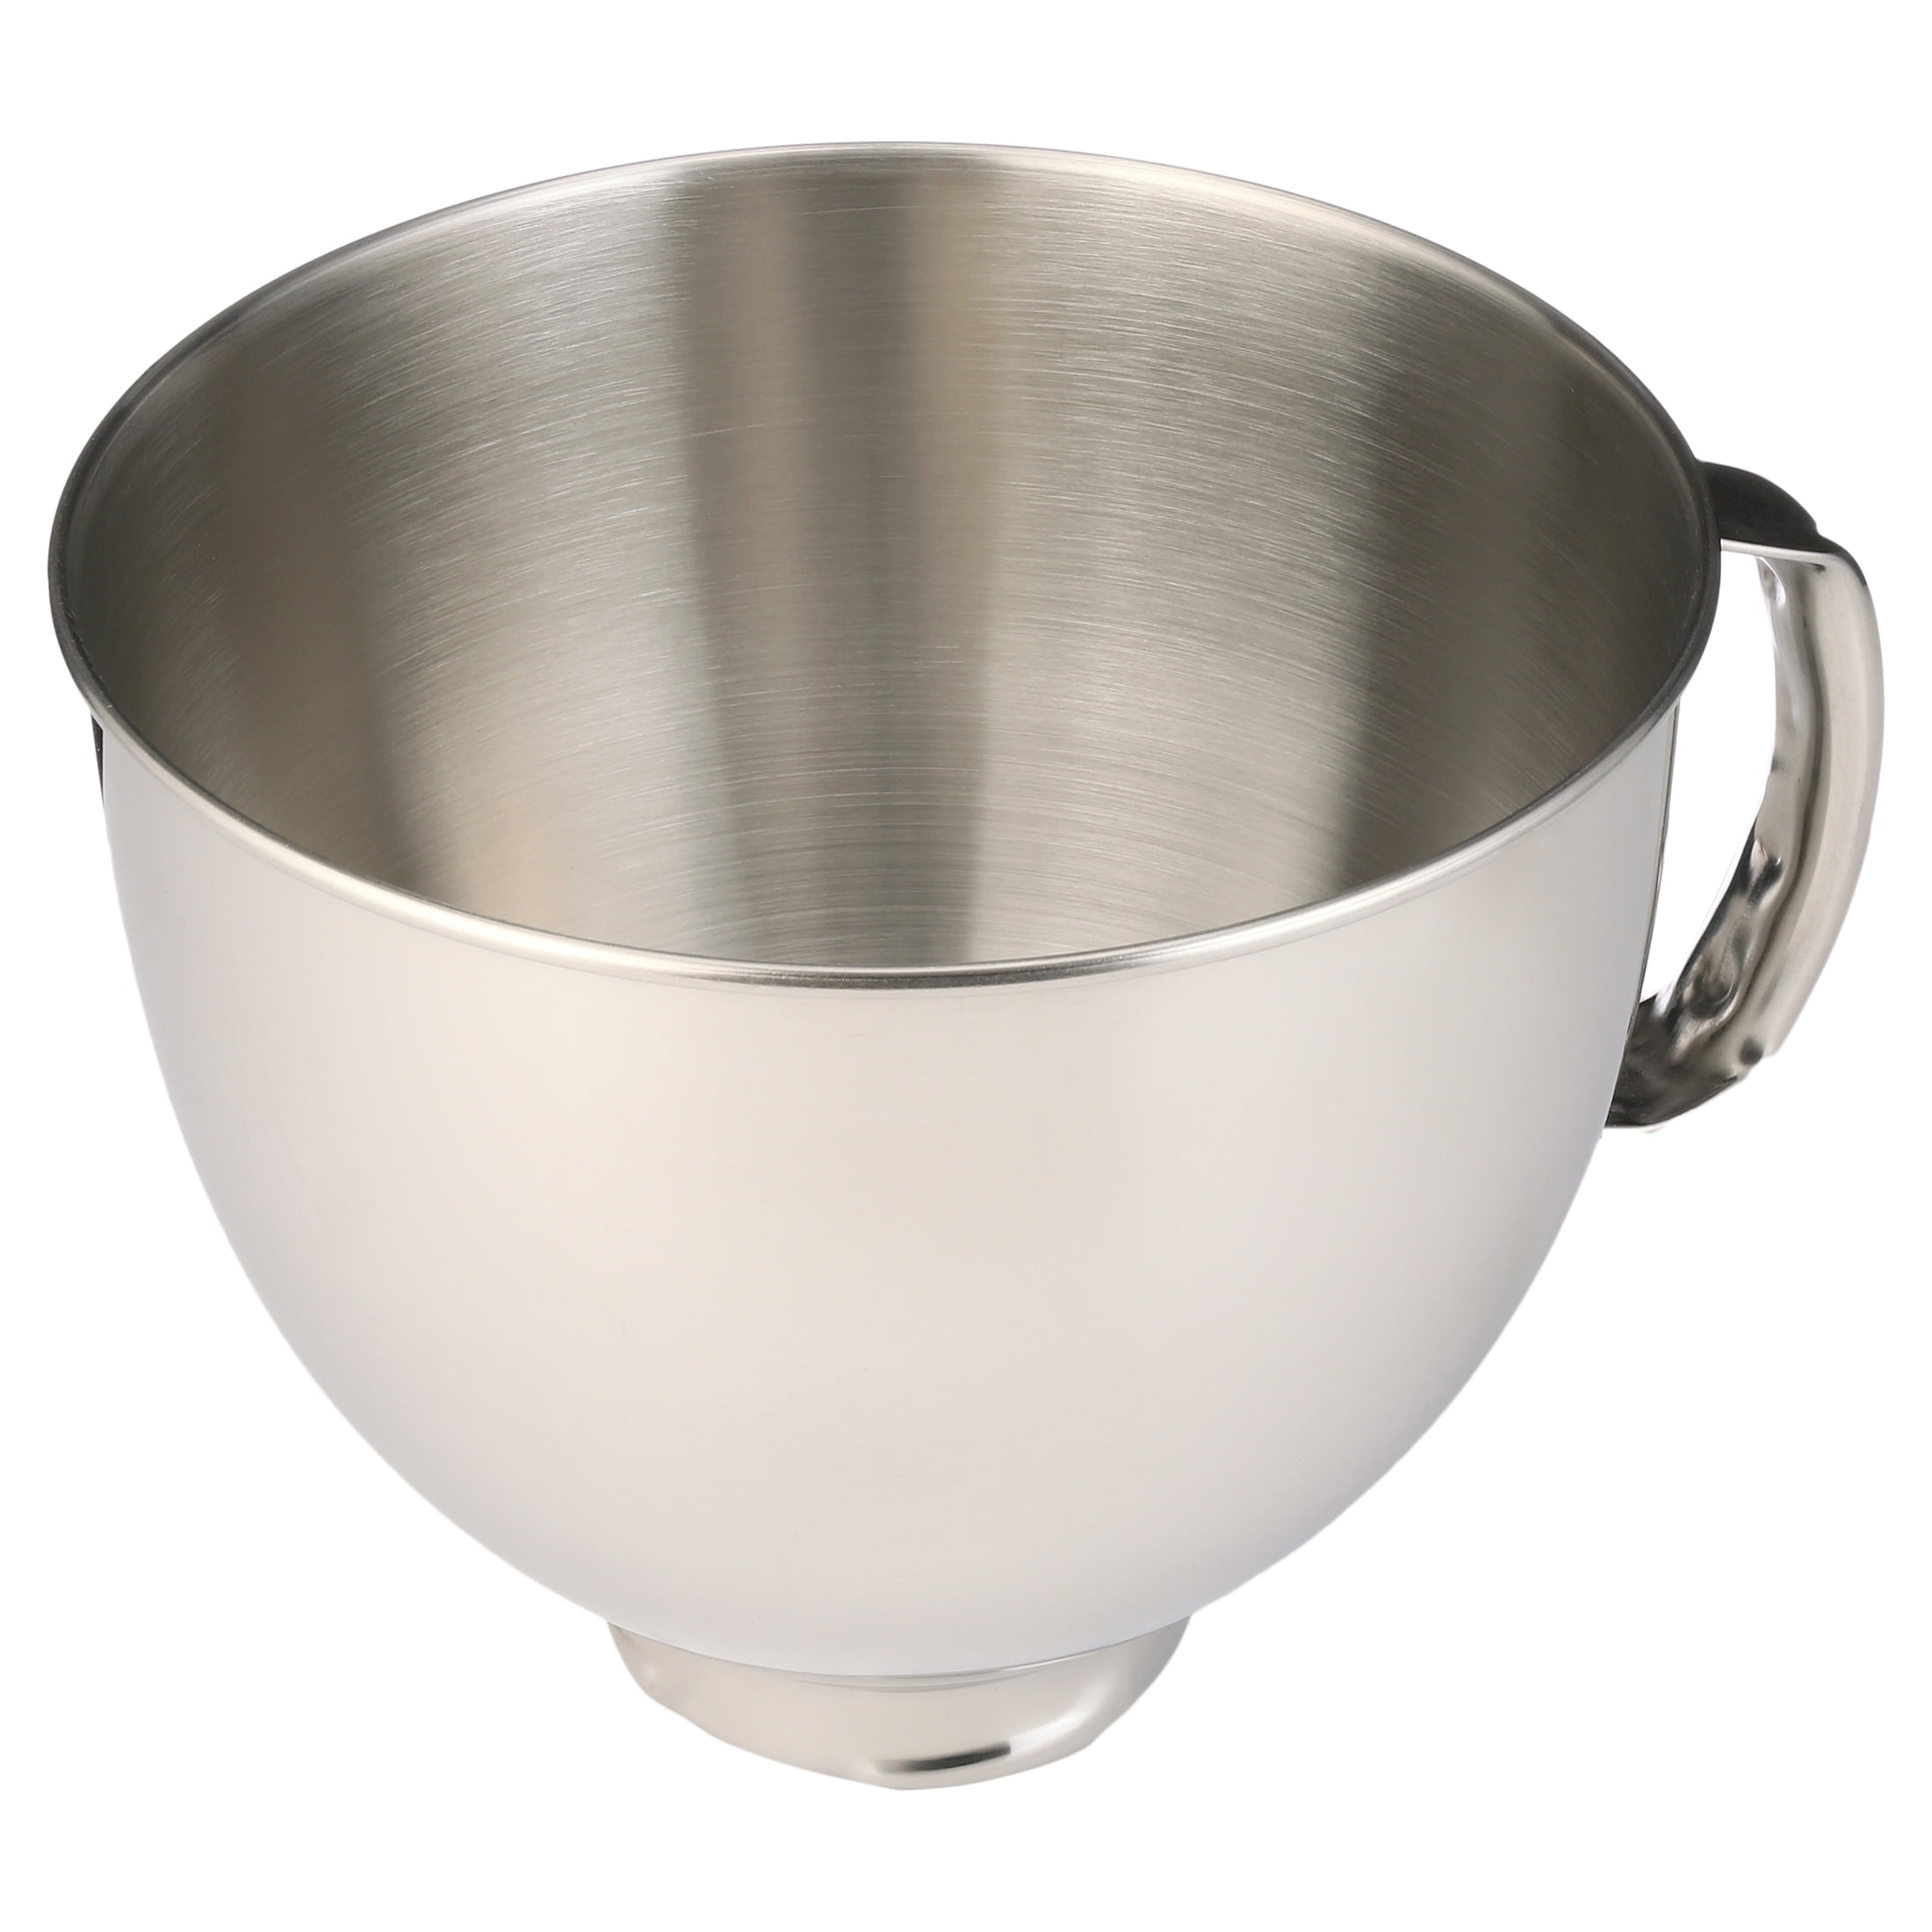 Kltchonald Stainless Steel Bowl,5 QT,Silver,Polished,Compatible with  Kitchenaid Artisan&Classic Series